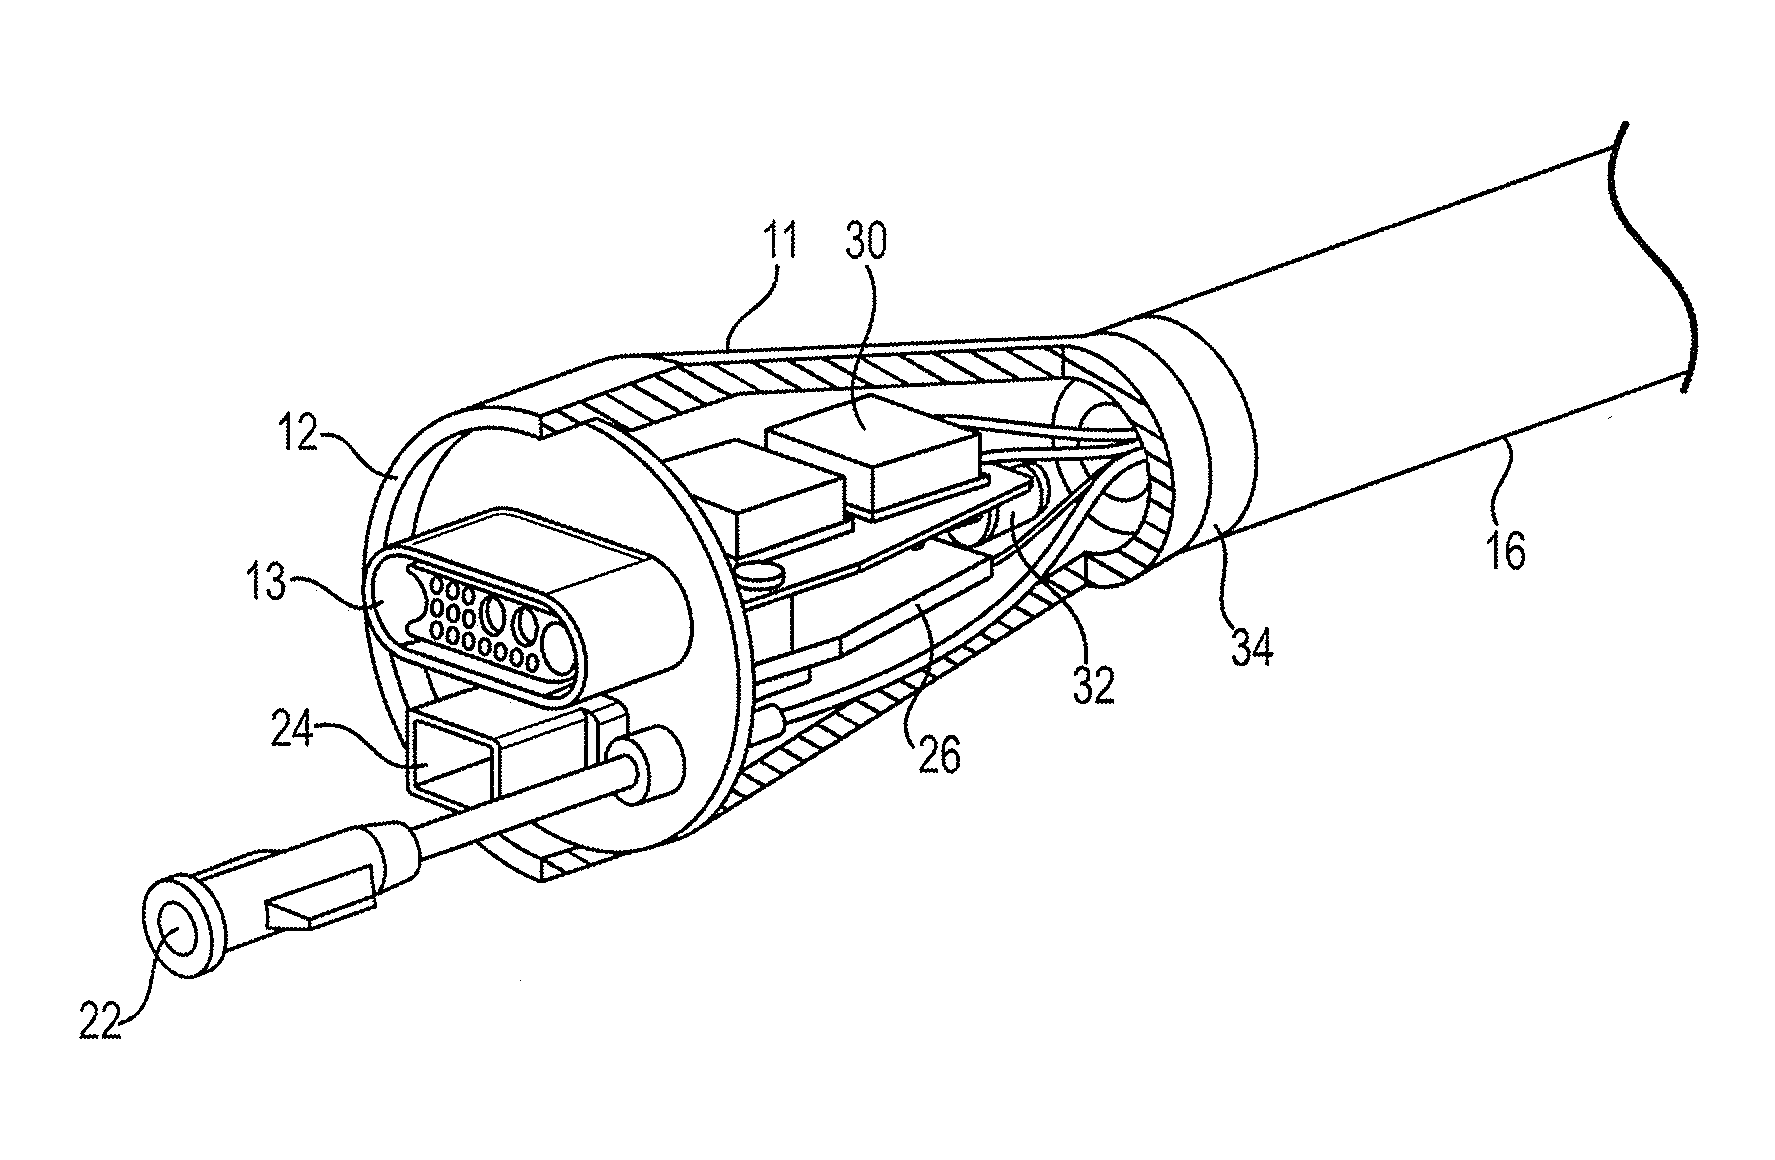 System and method for identifying and communicating with an interventional medical device